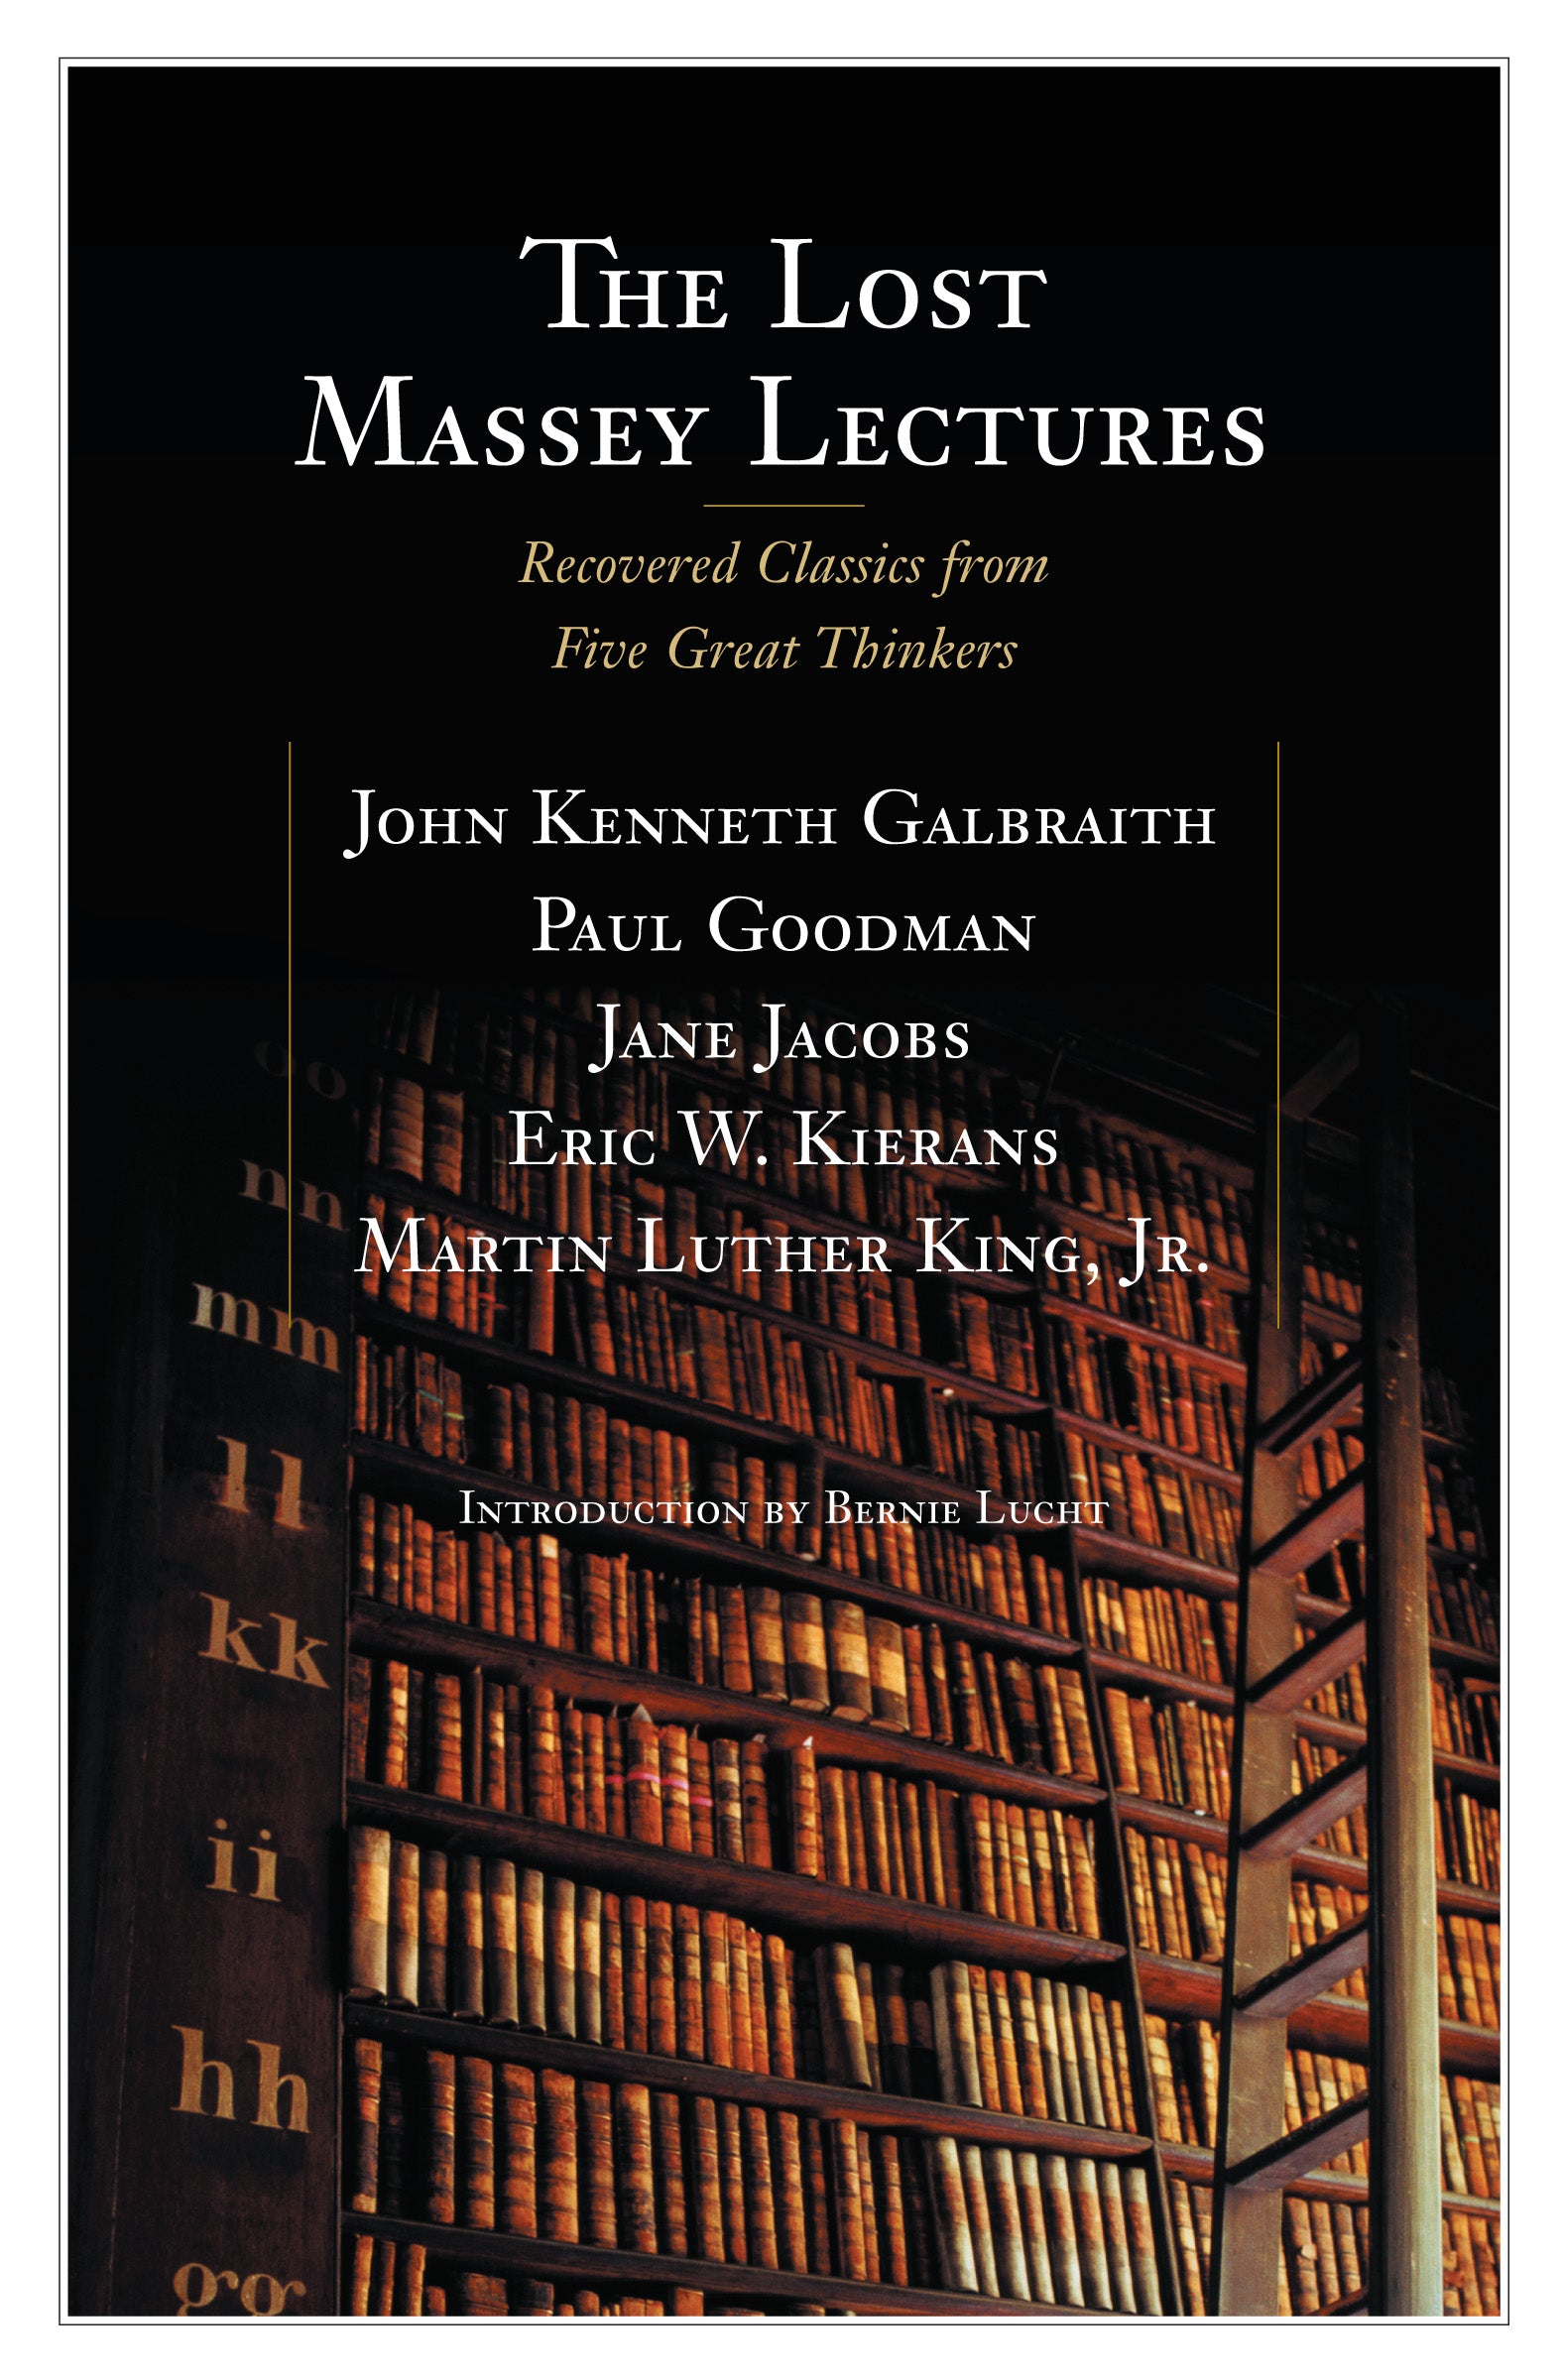 The Lost Massey Lectures House of Anansi Press